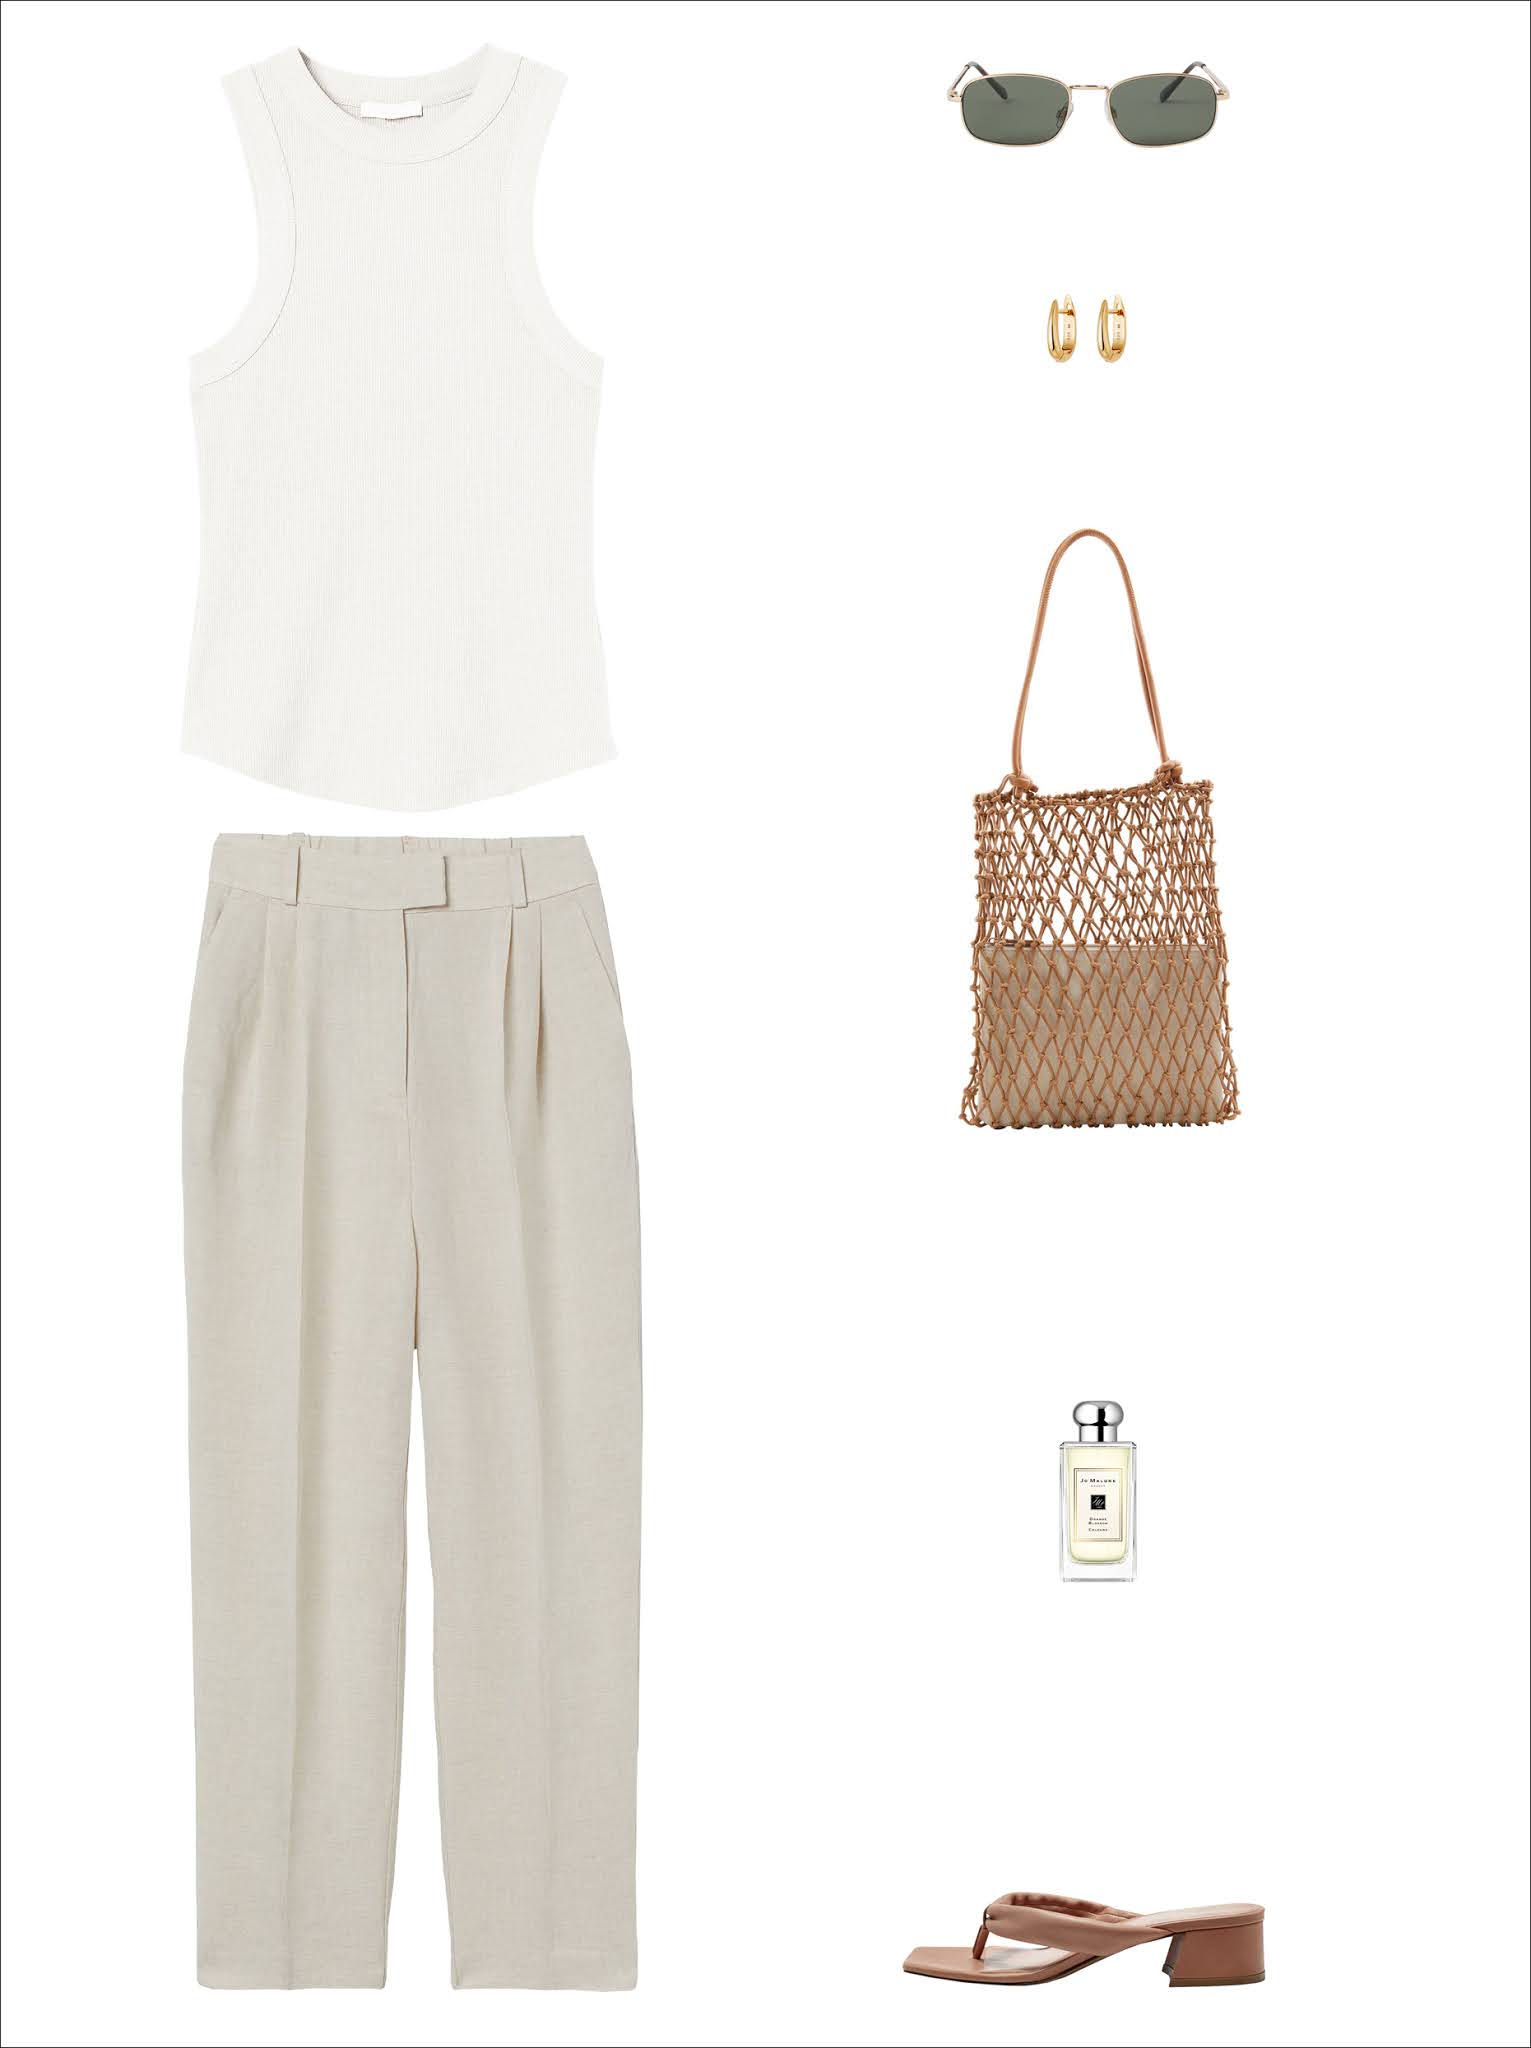 Every Piece in This Neutral Summer Outfit is Under $100